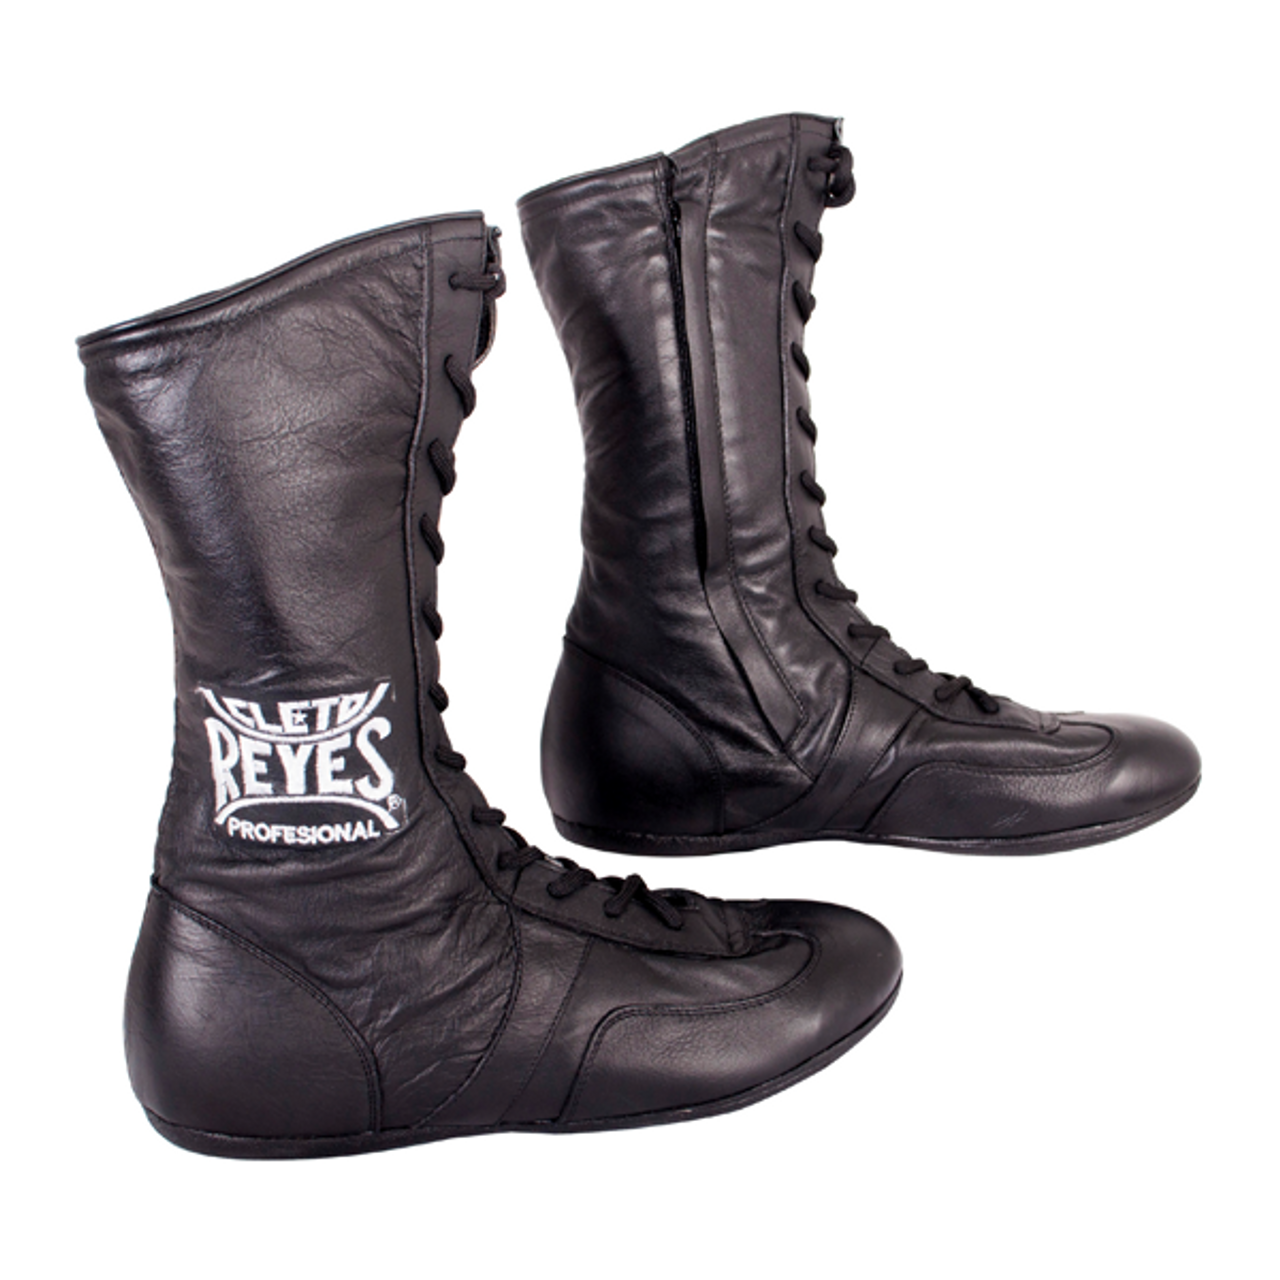 Cleto Reyes Classic Boxing Shoes